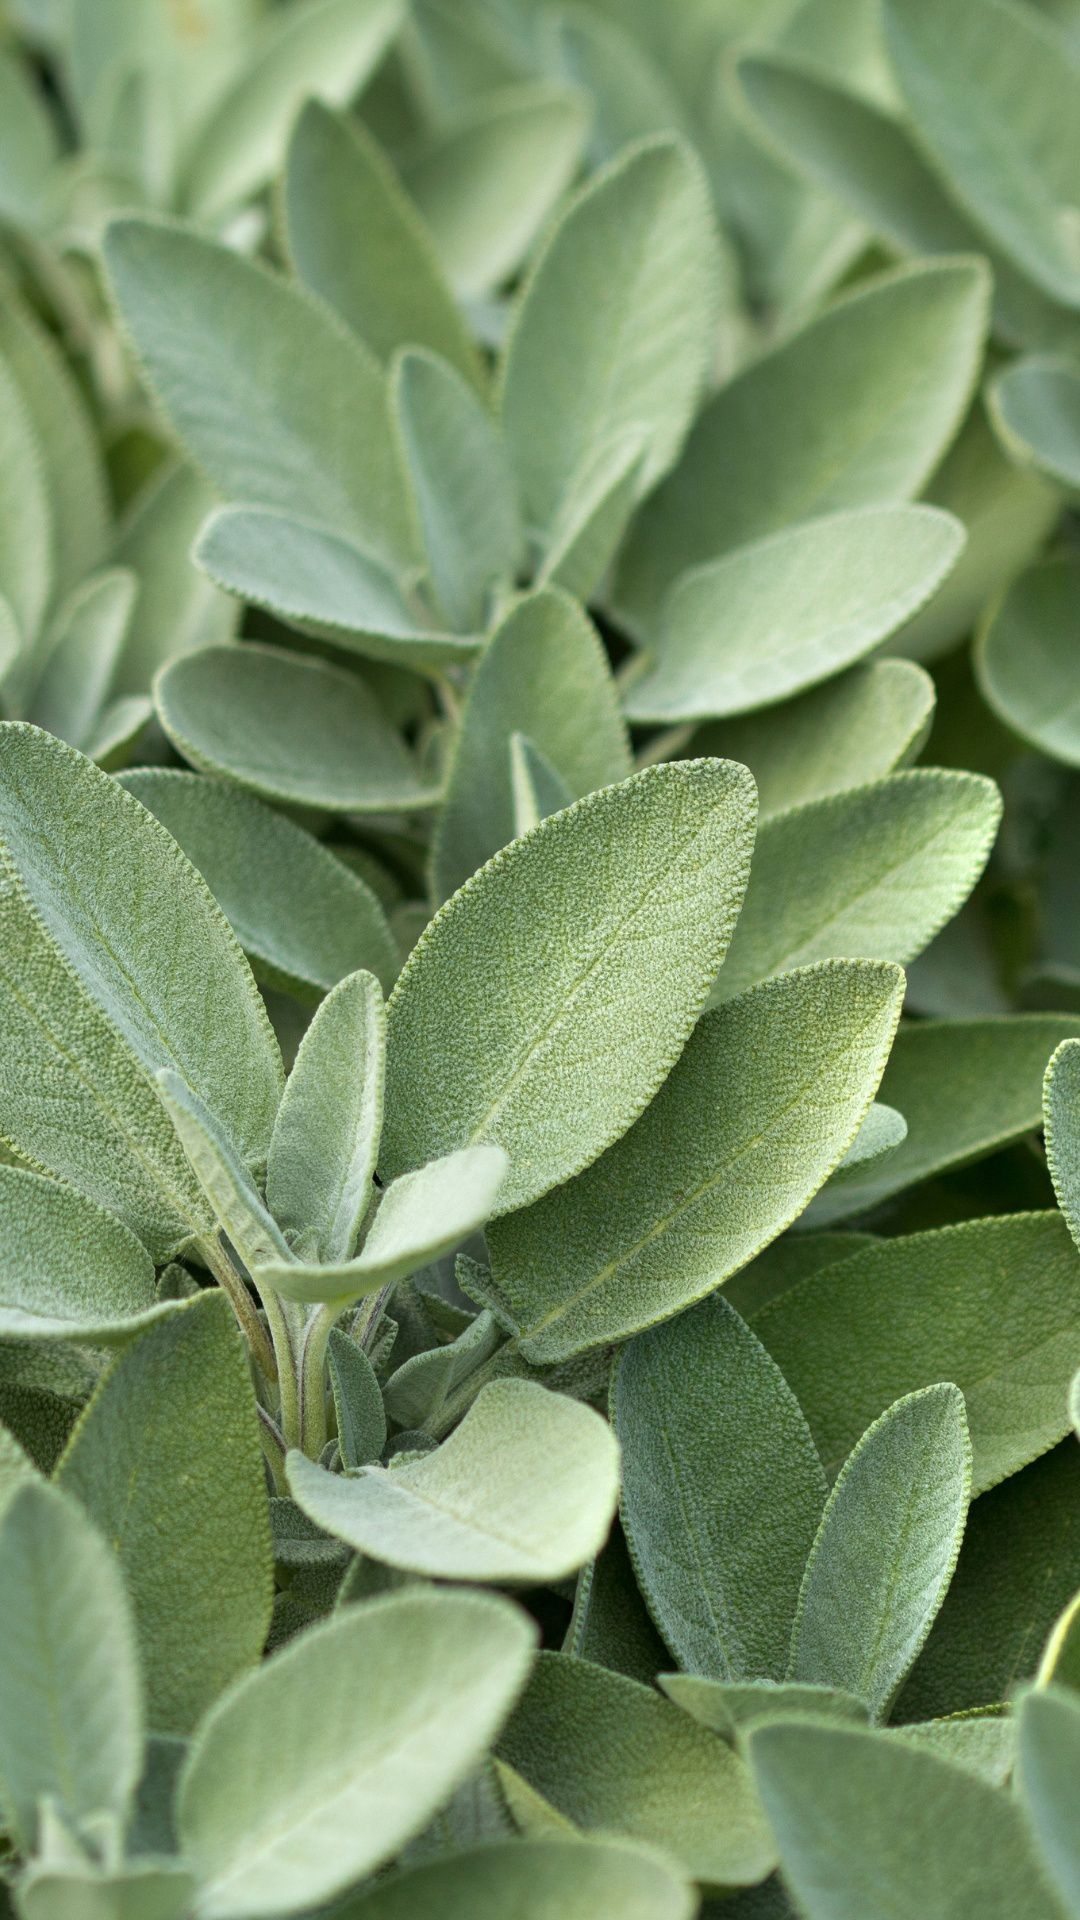 Sage herb plant, Culinary ingredient, Medicinal properties, Natural green, 1080x1920 Full HD Handy